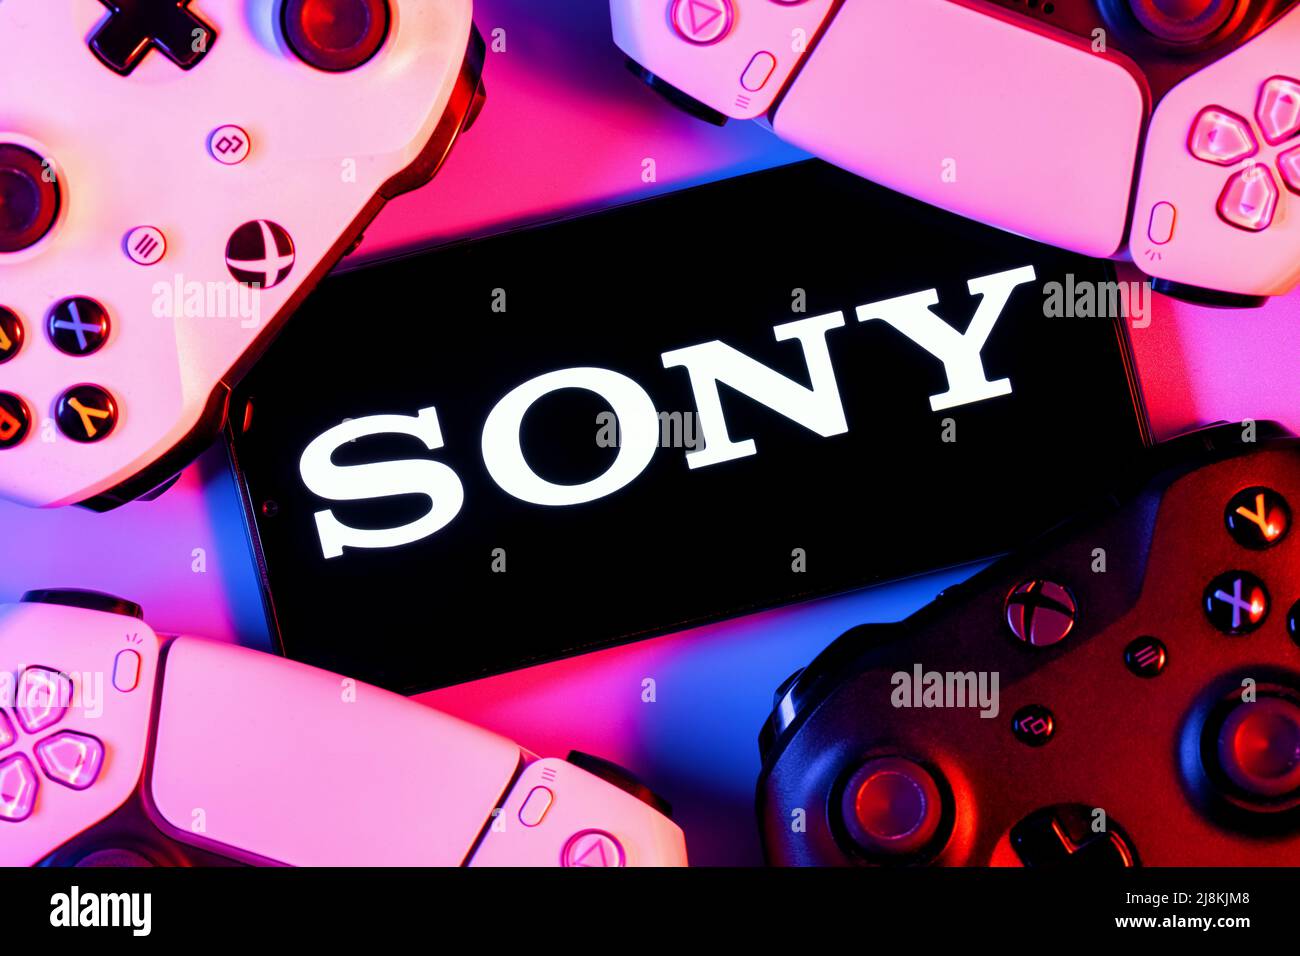 Smartphone with SONY logo on screen surrounded by gamepads. Stock Photo